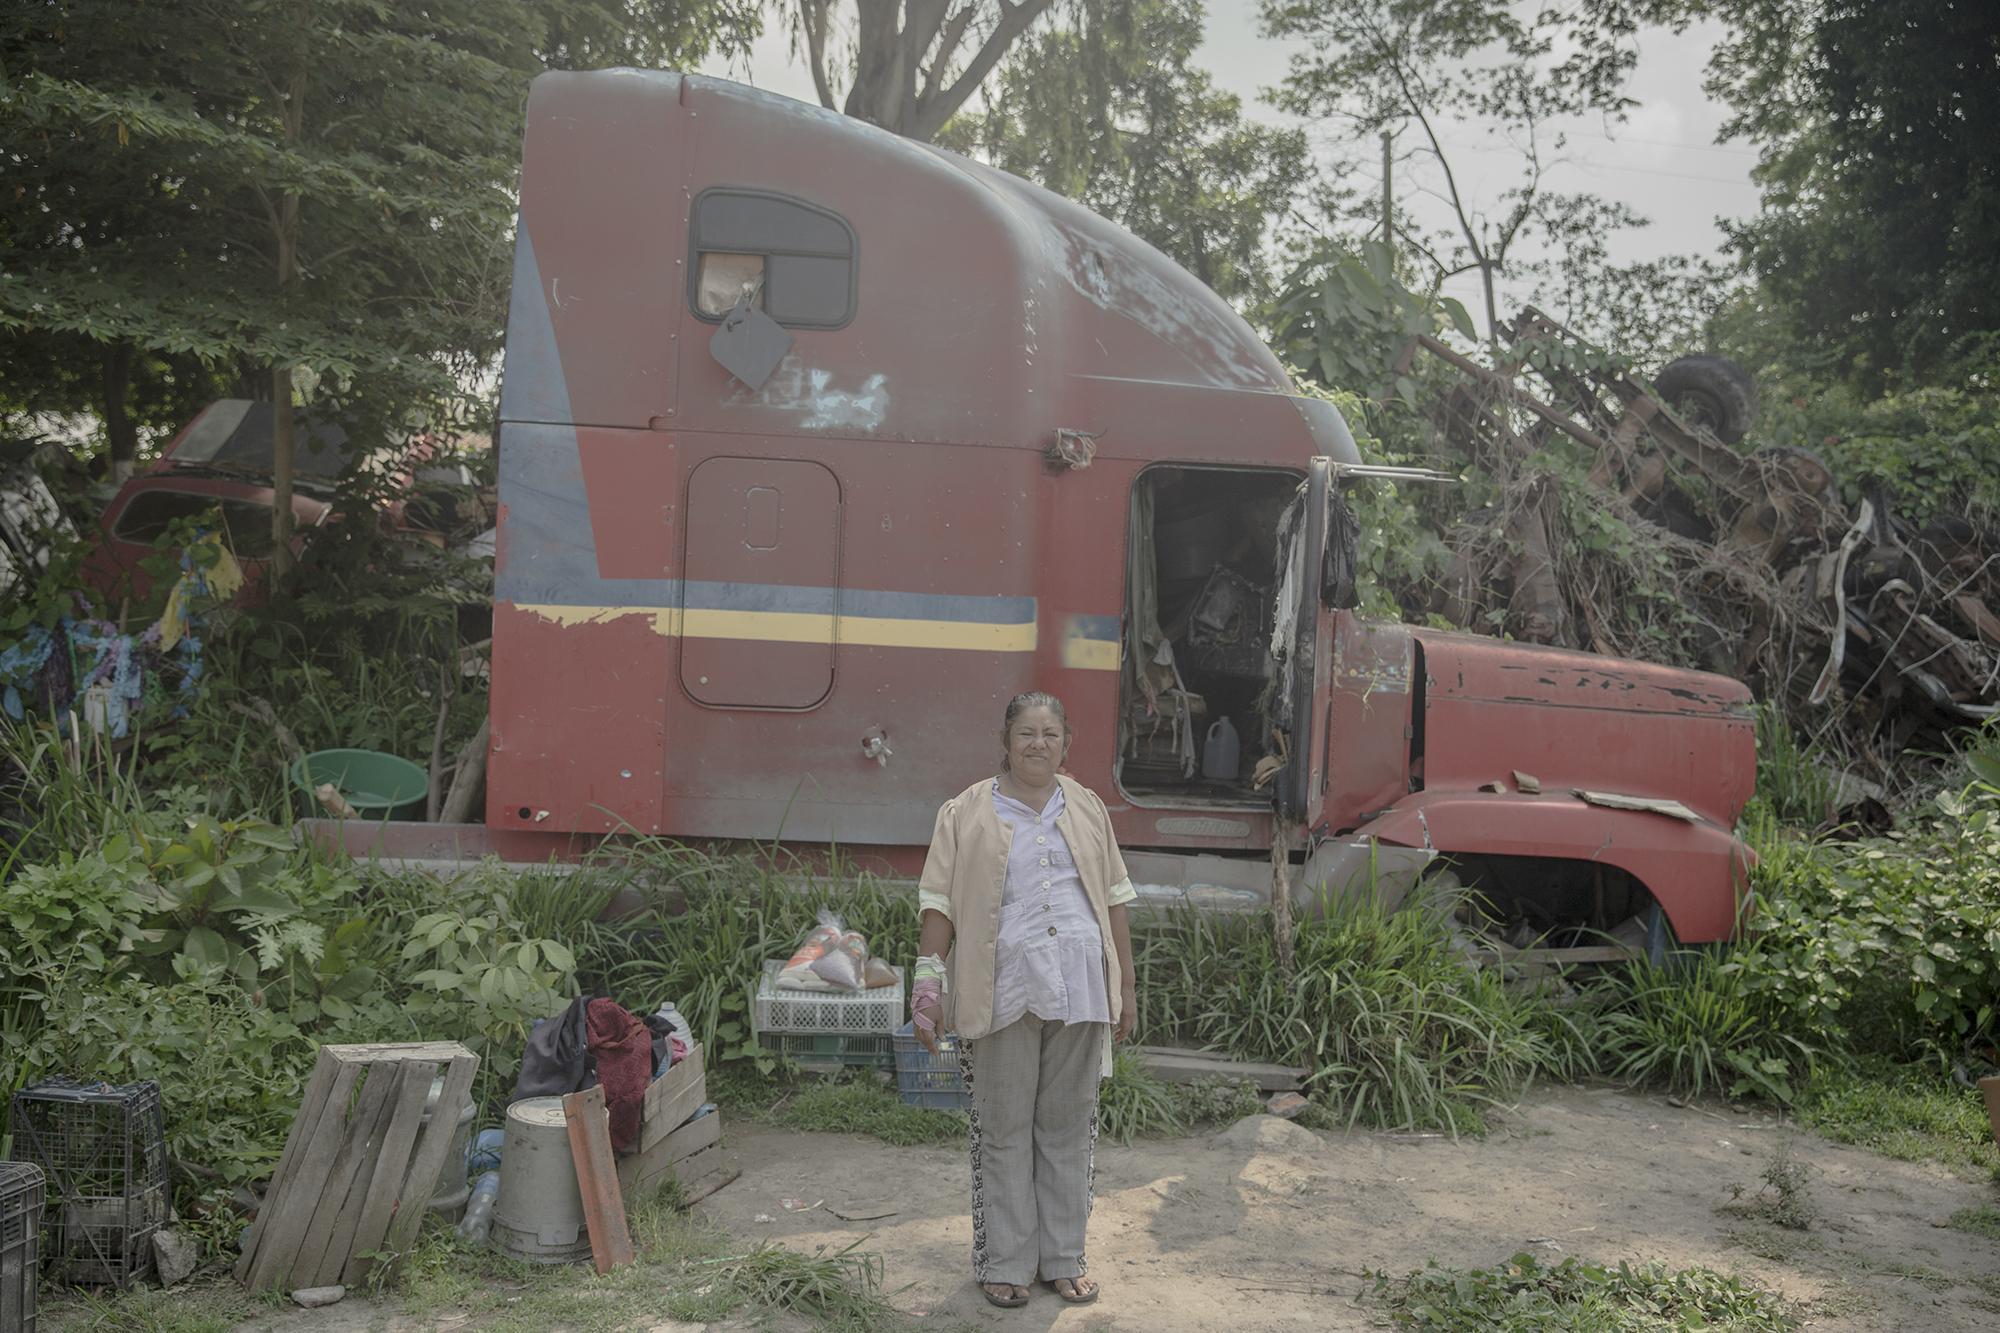 María Magdalena lives in what is left of a semi-trailer on the outskirts of the urban center of San Vicente. Volunteers from Solidaritón went out, supplies in hand, to meet her. Photo: Carlos Barrera/El Faro